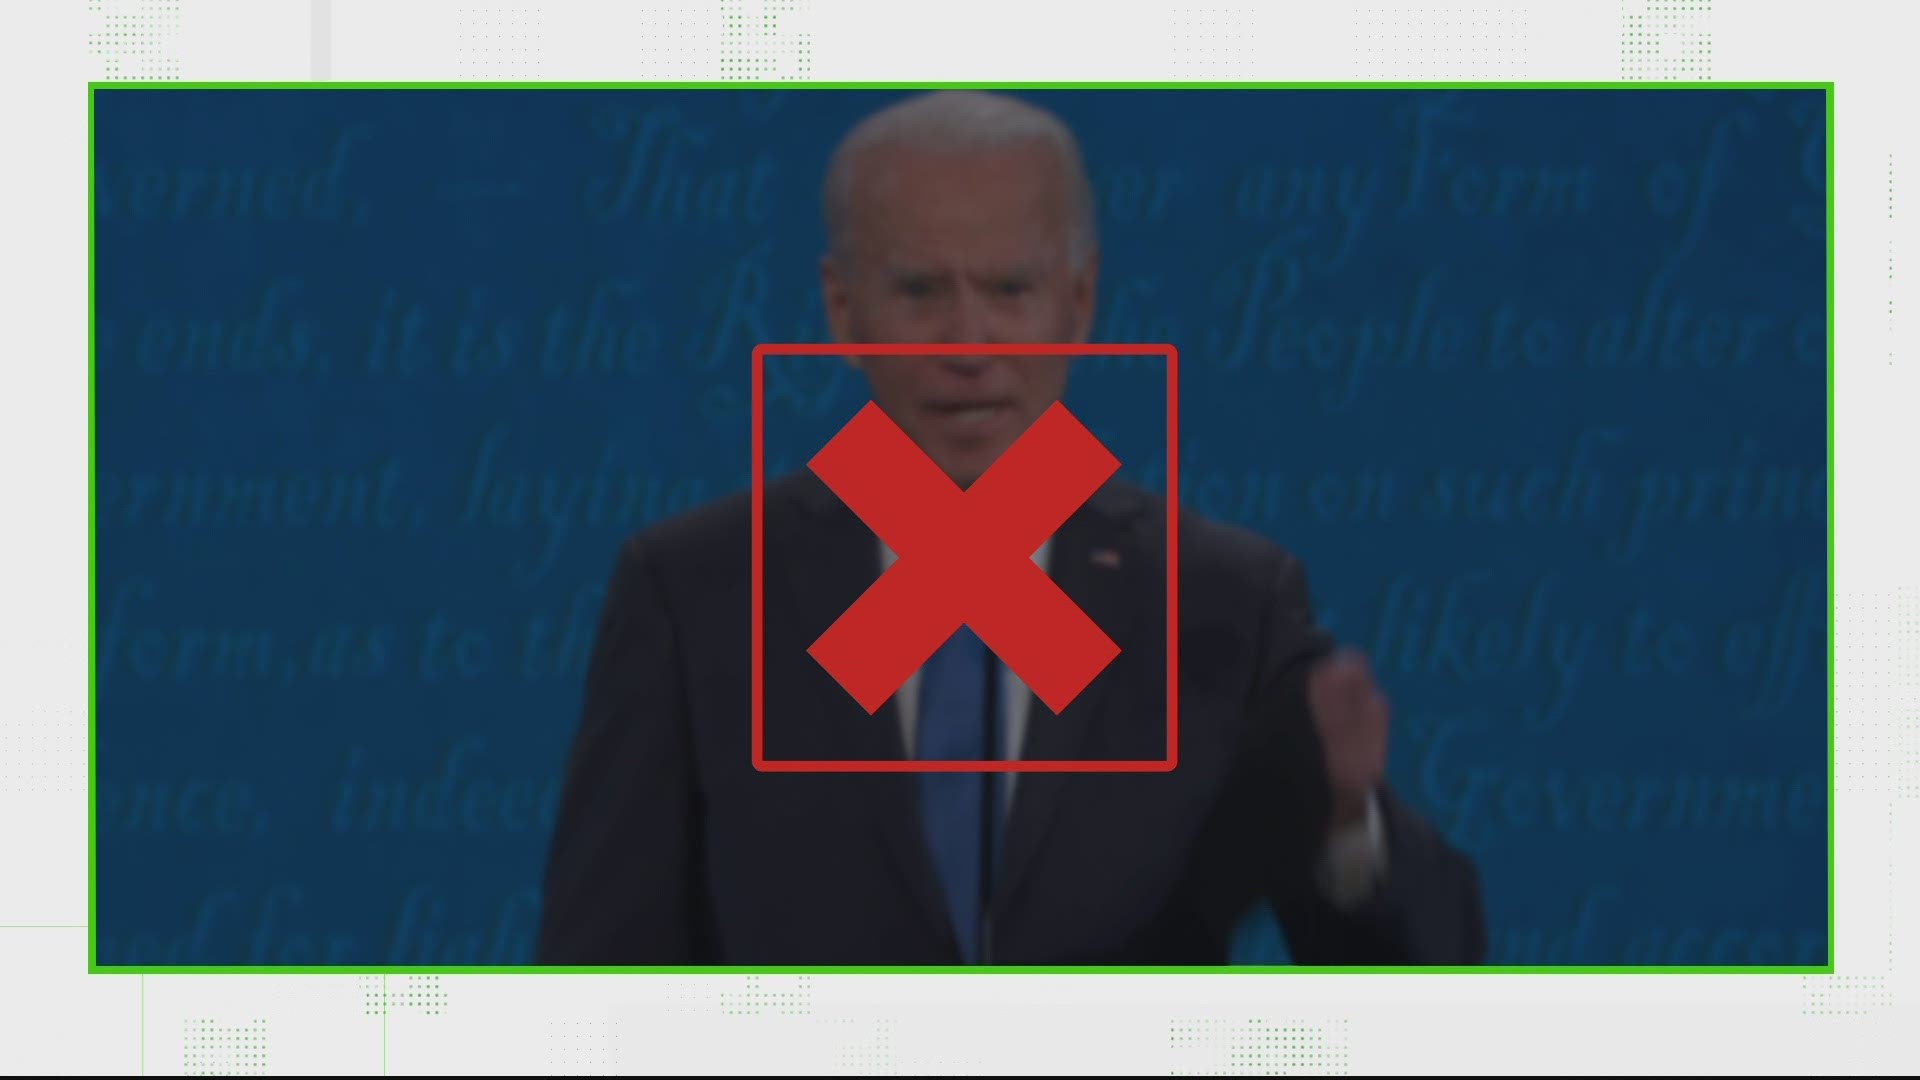 Our VERIFY researchers were fact-checking what President Trump and Joe Biden said during the second and final presidential debate.